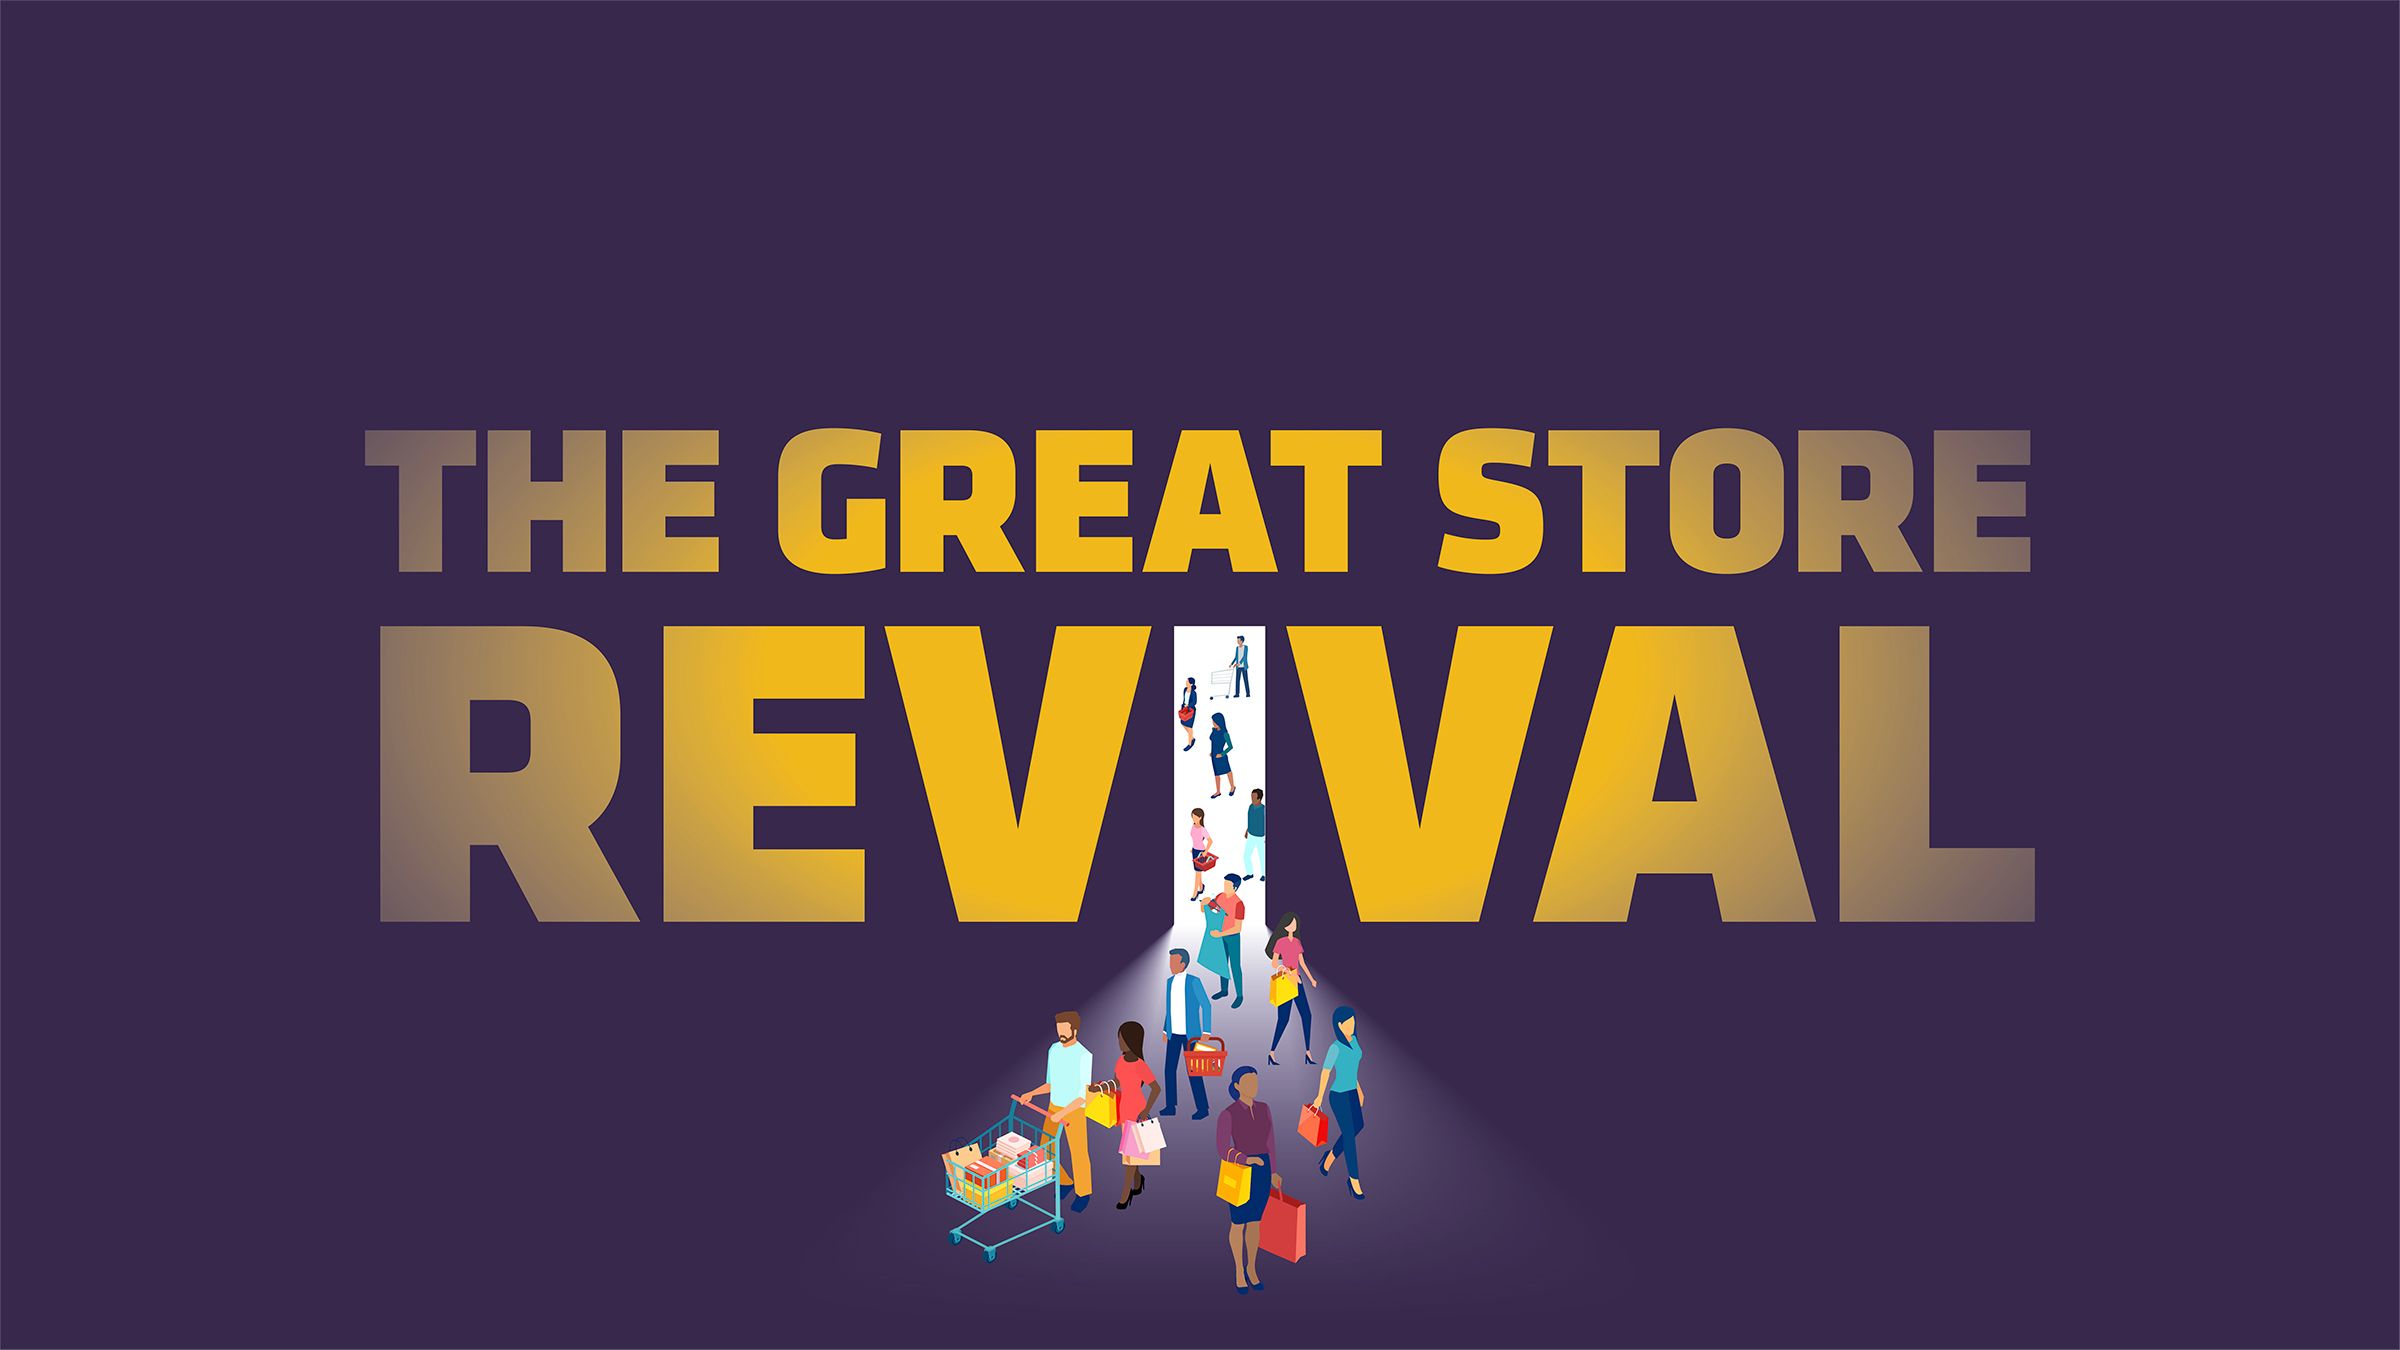 The Great Store Revival report title